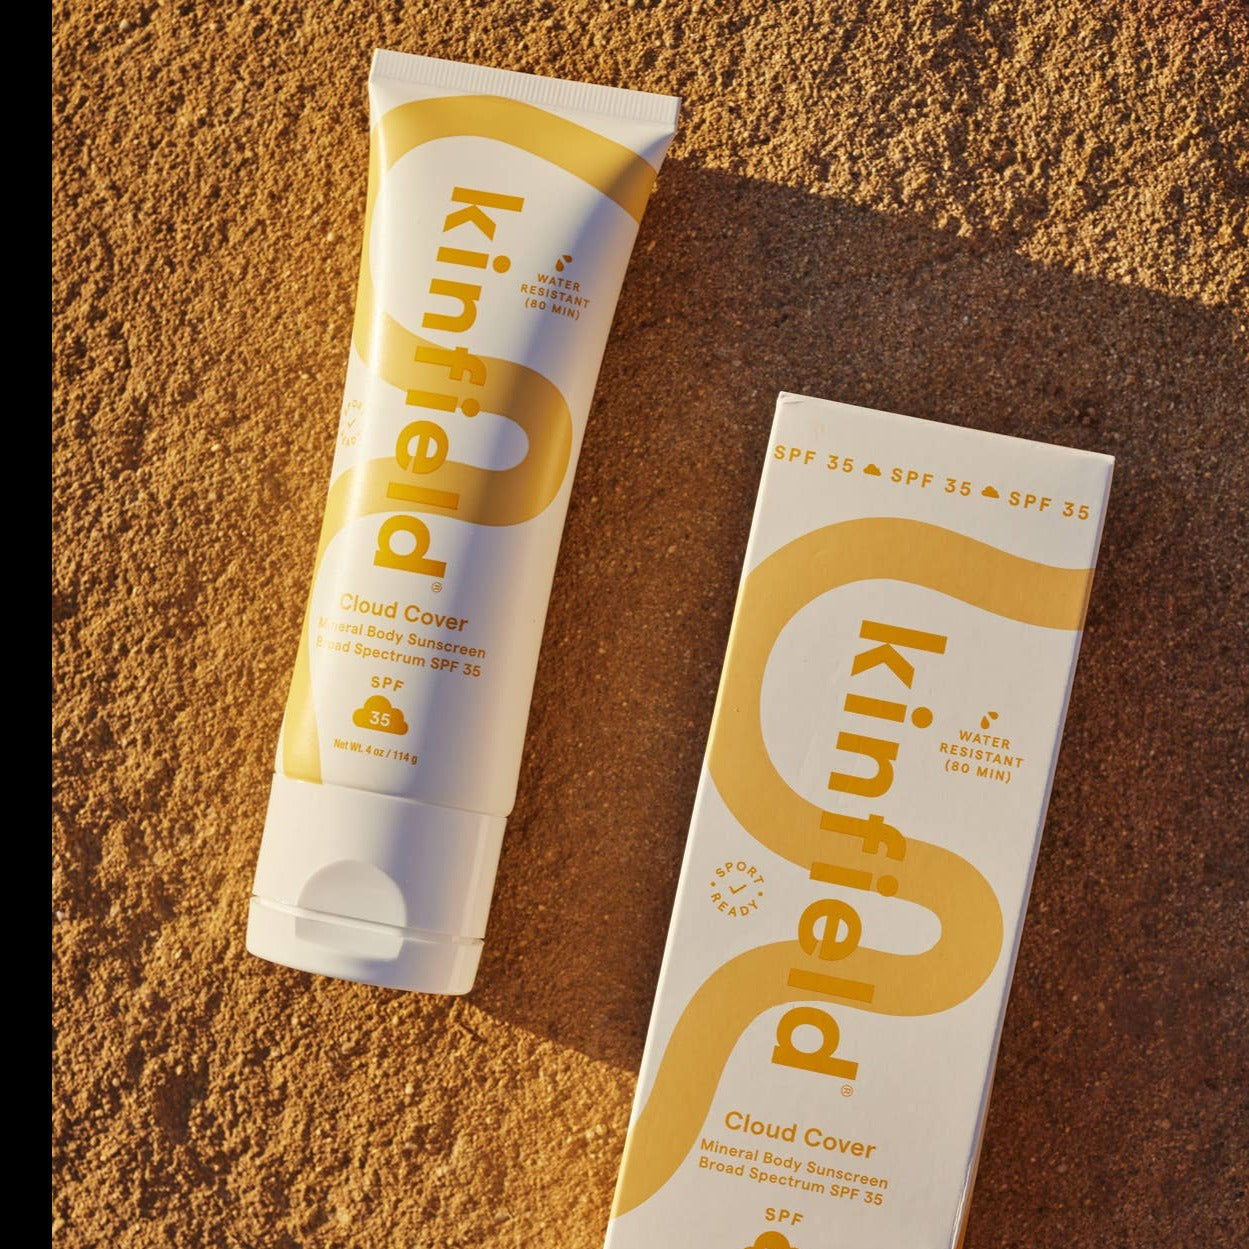 Cloud Cover Mineral Body SPF 35 Sunscreen